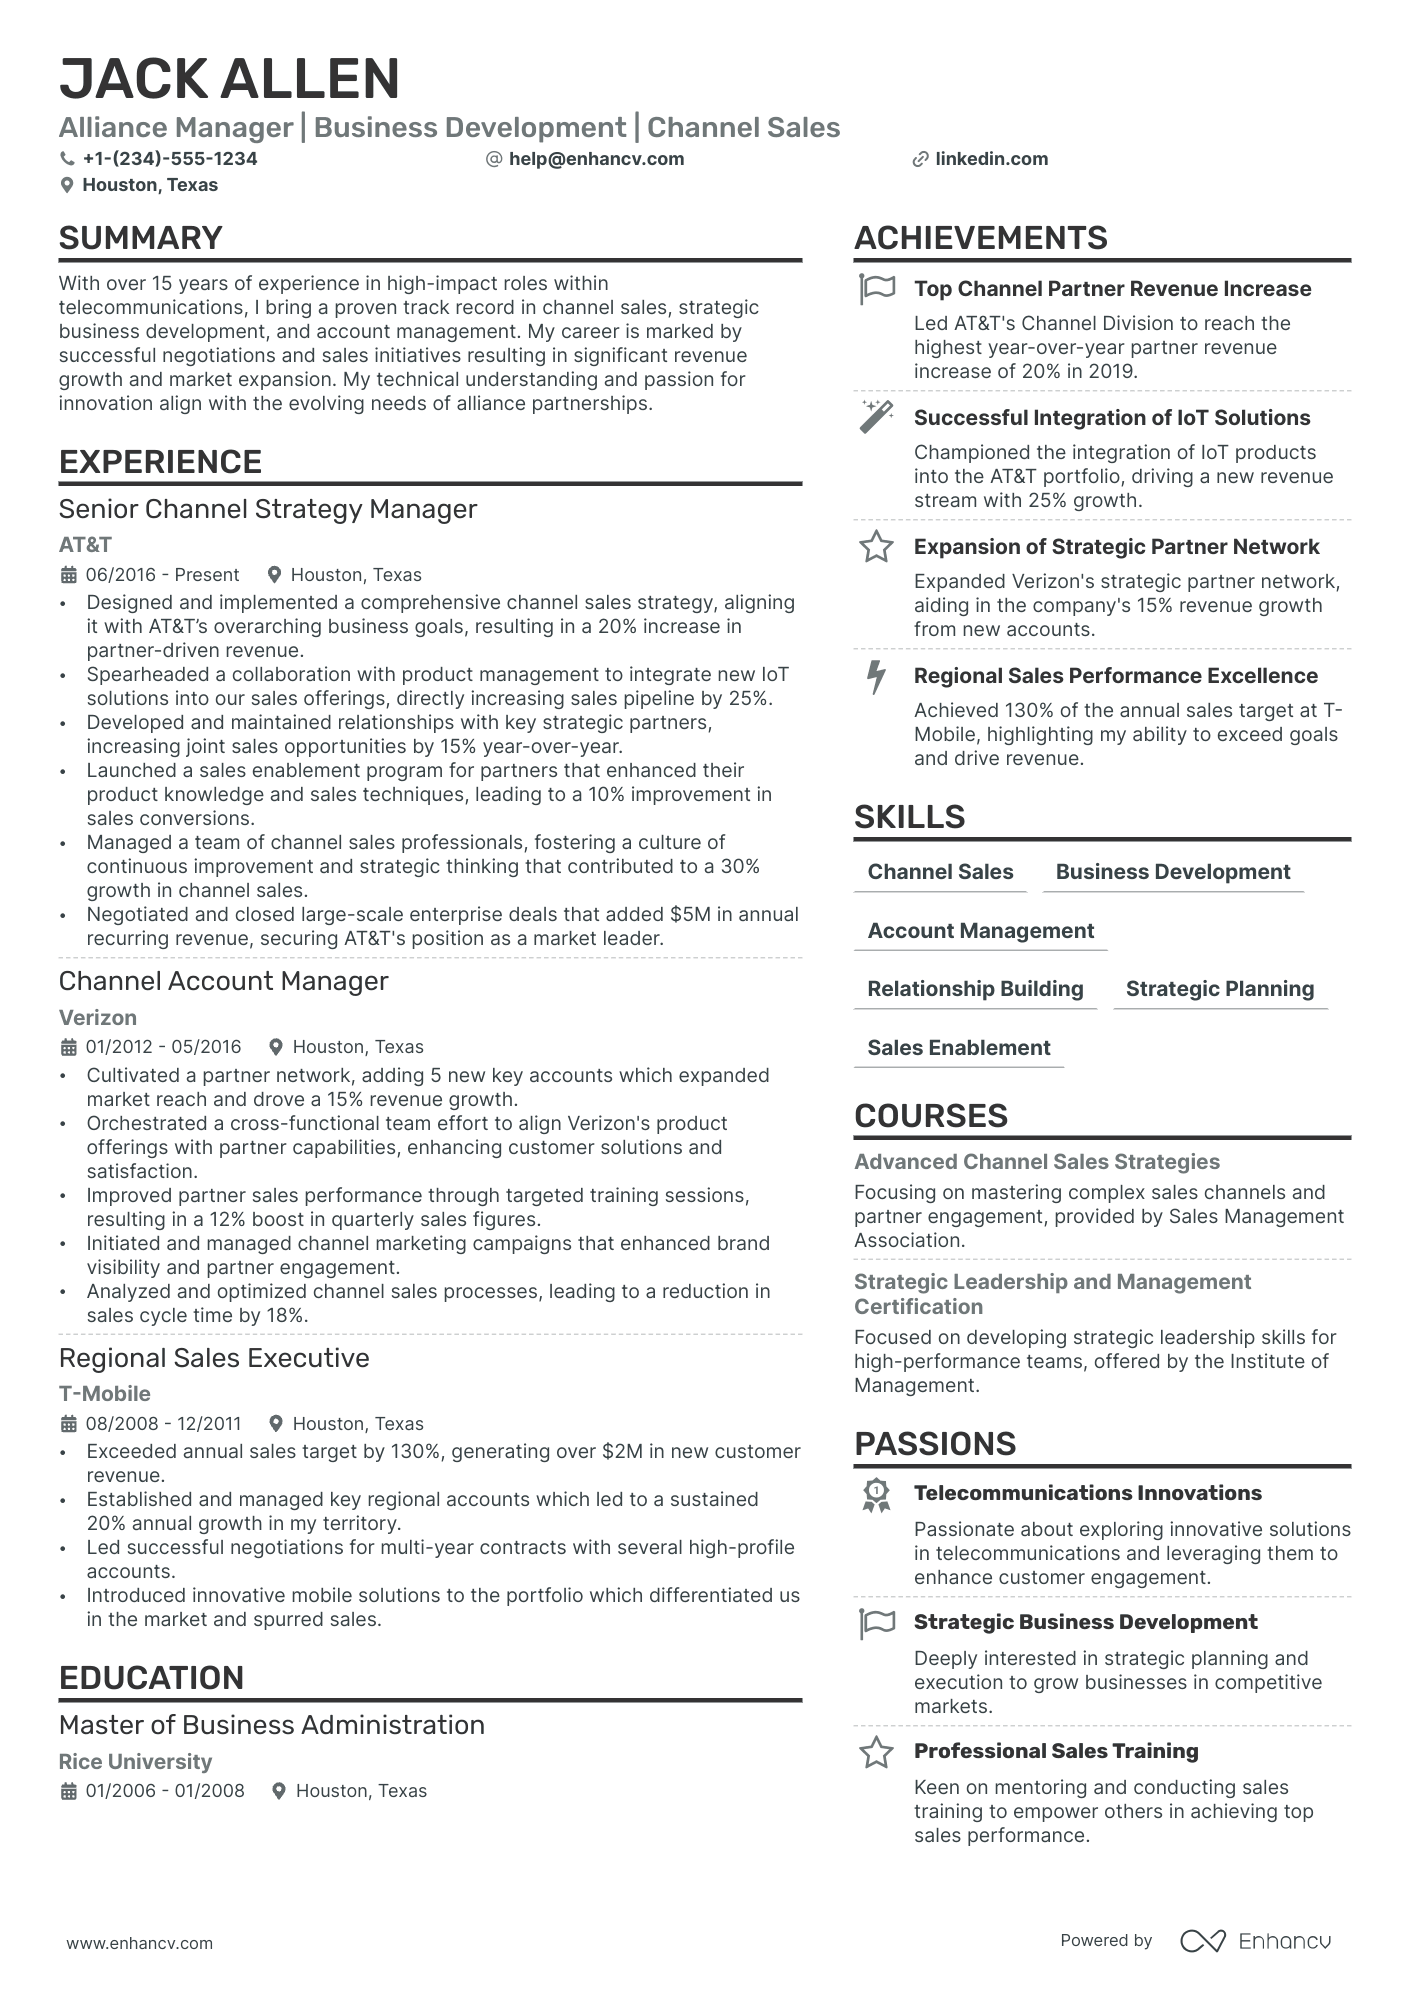 Alliance Manager resume example